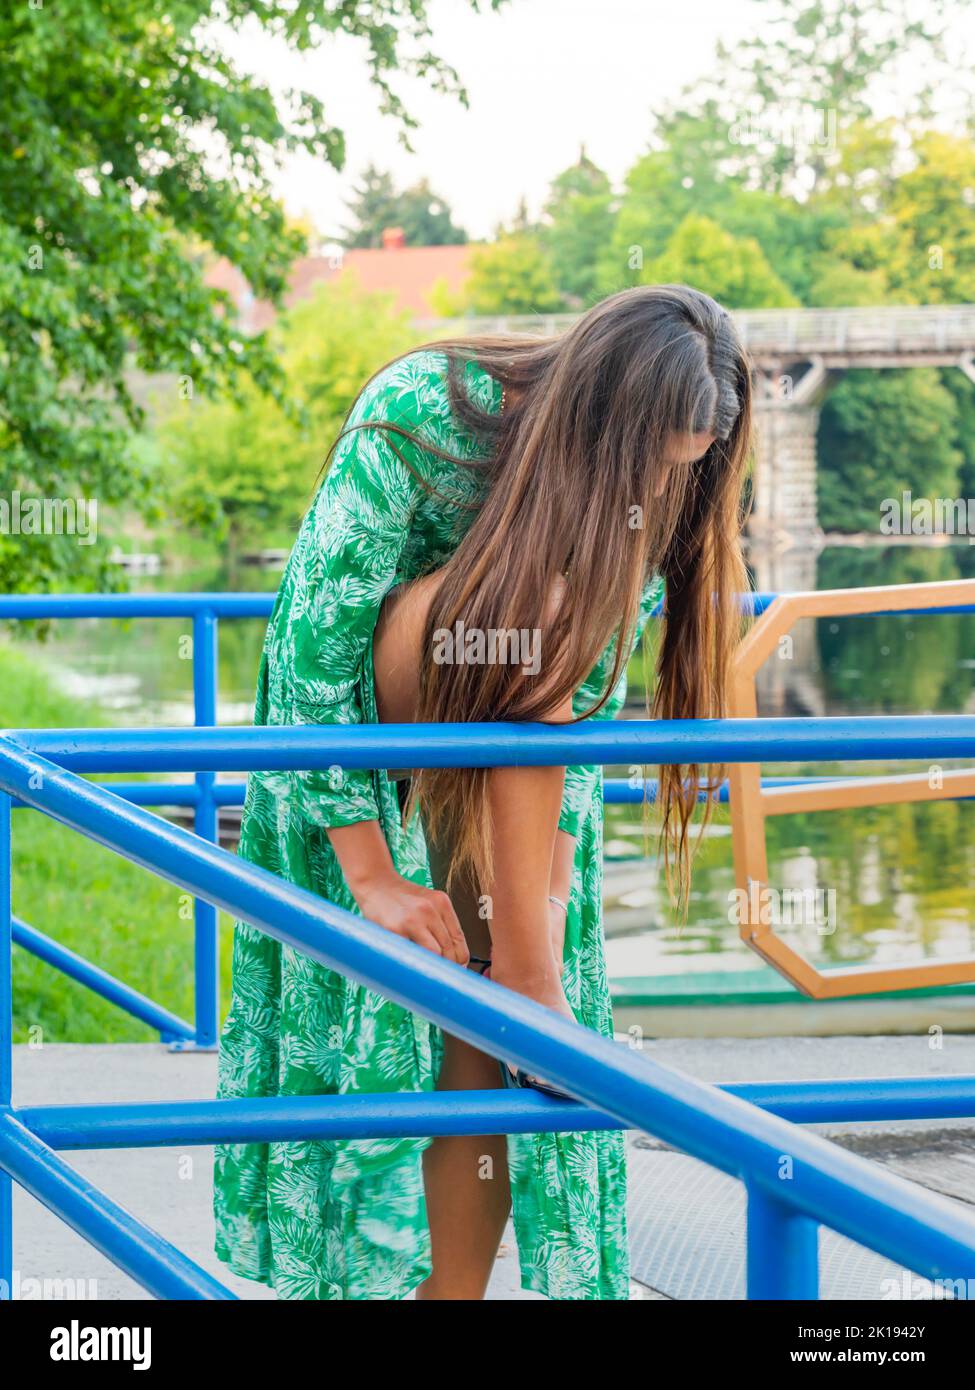 Young woman outside outdoors awkward position situation tying her high-heels Stock Photo